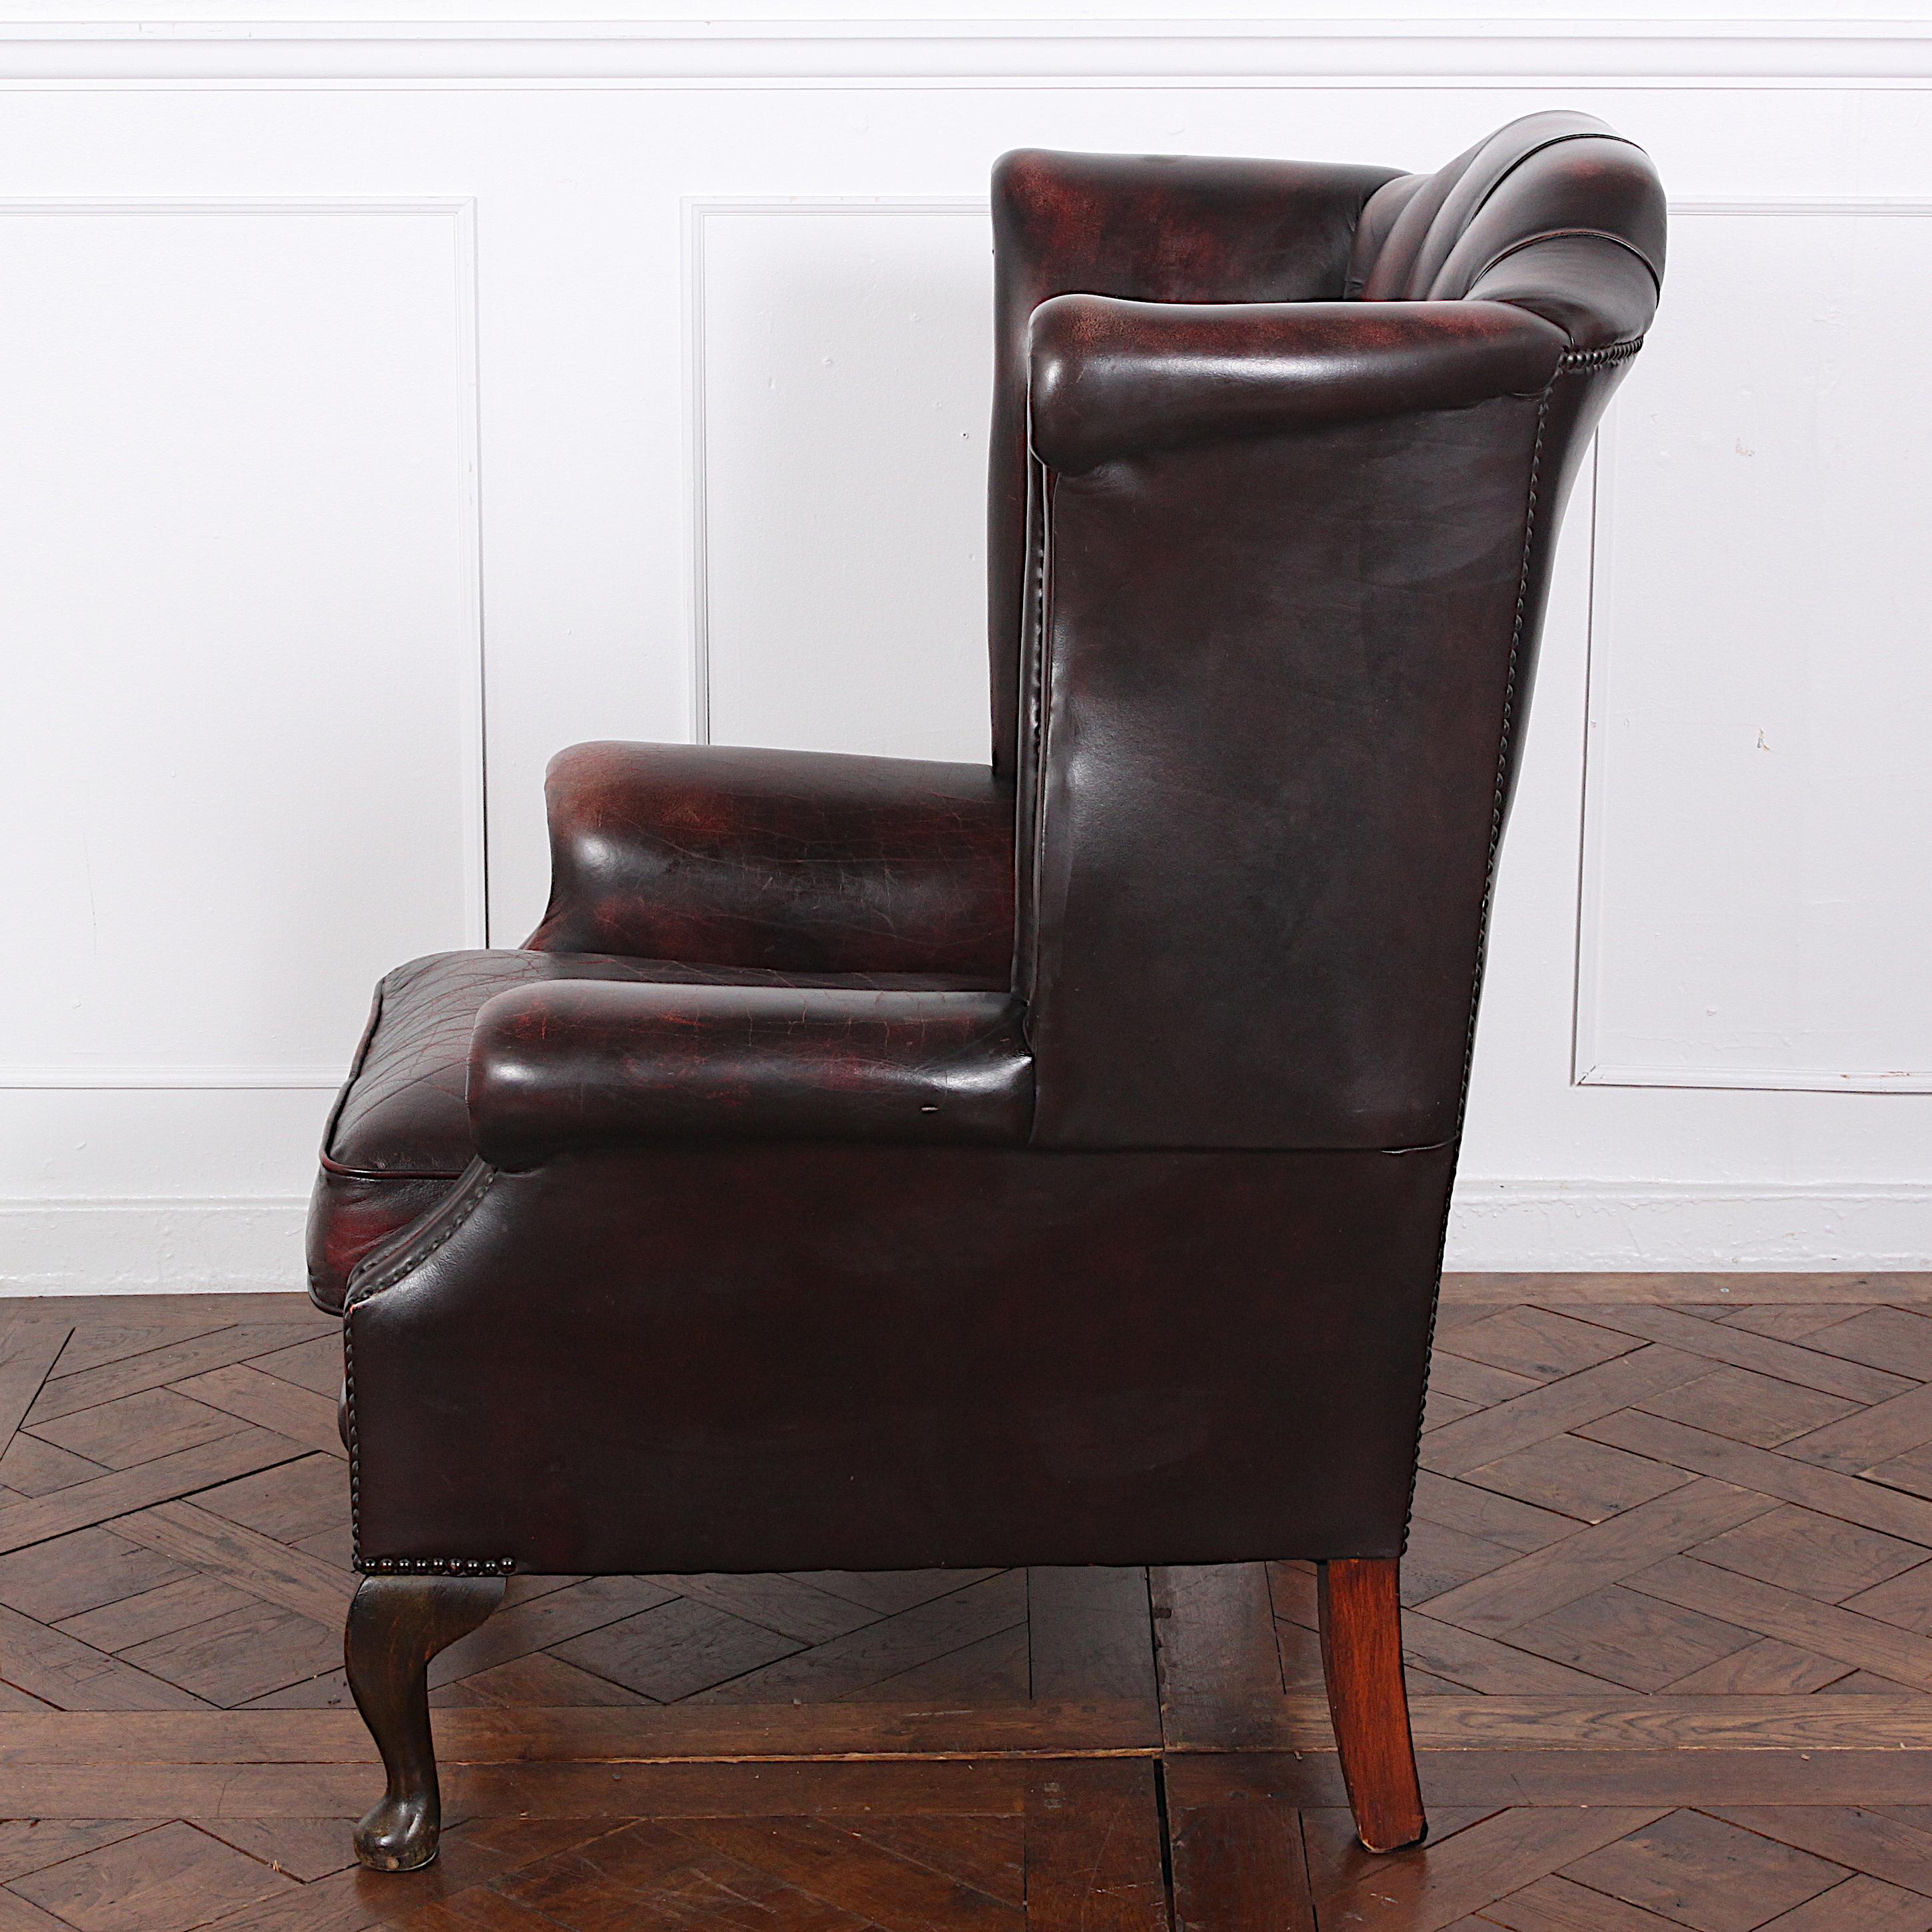 Early 20th Century Classic and Elegant British Leather Wingback Chair